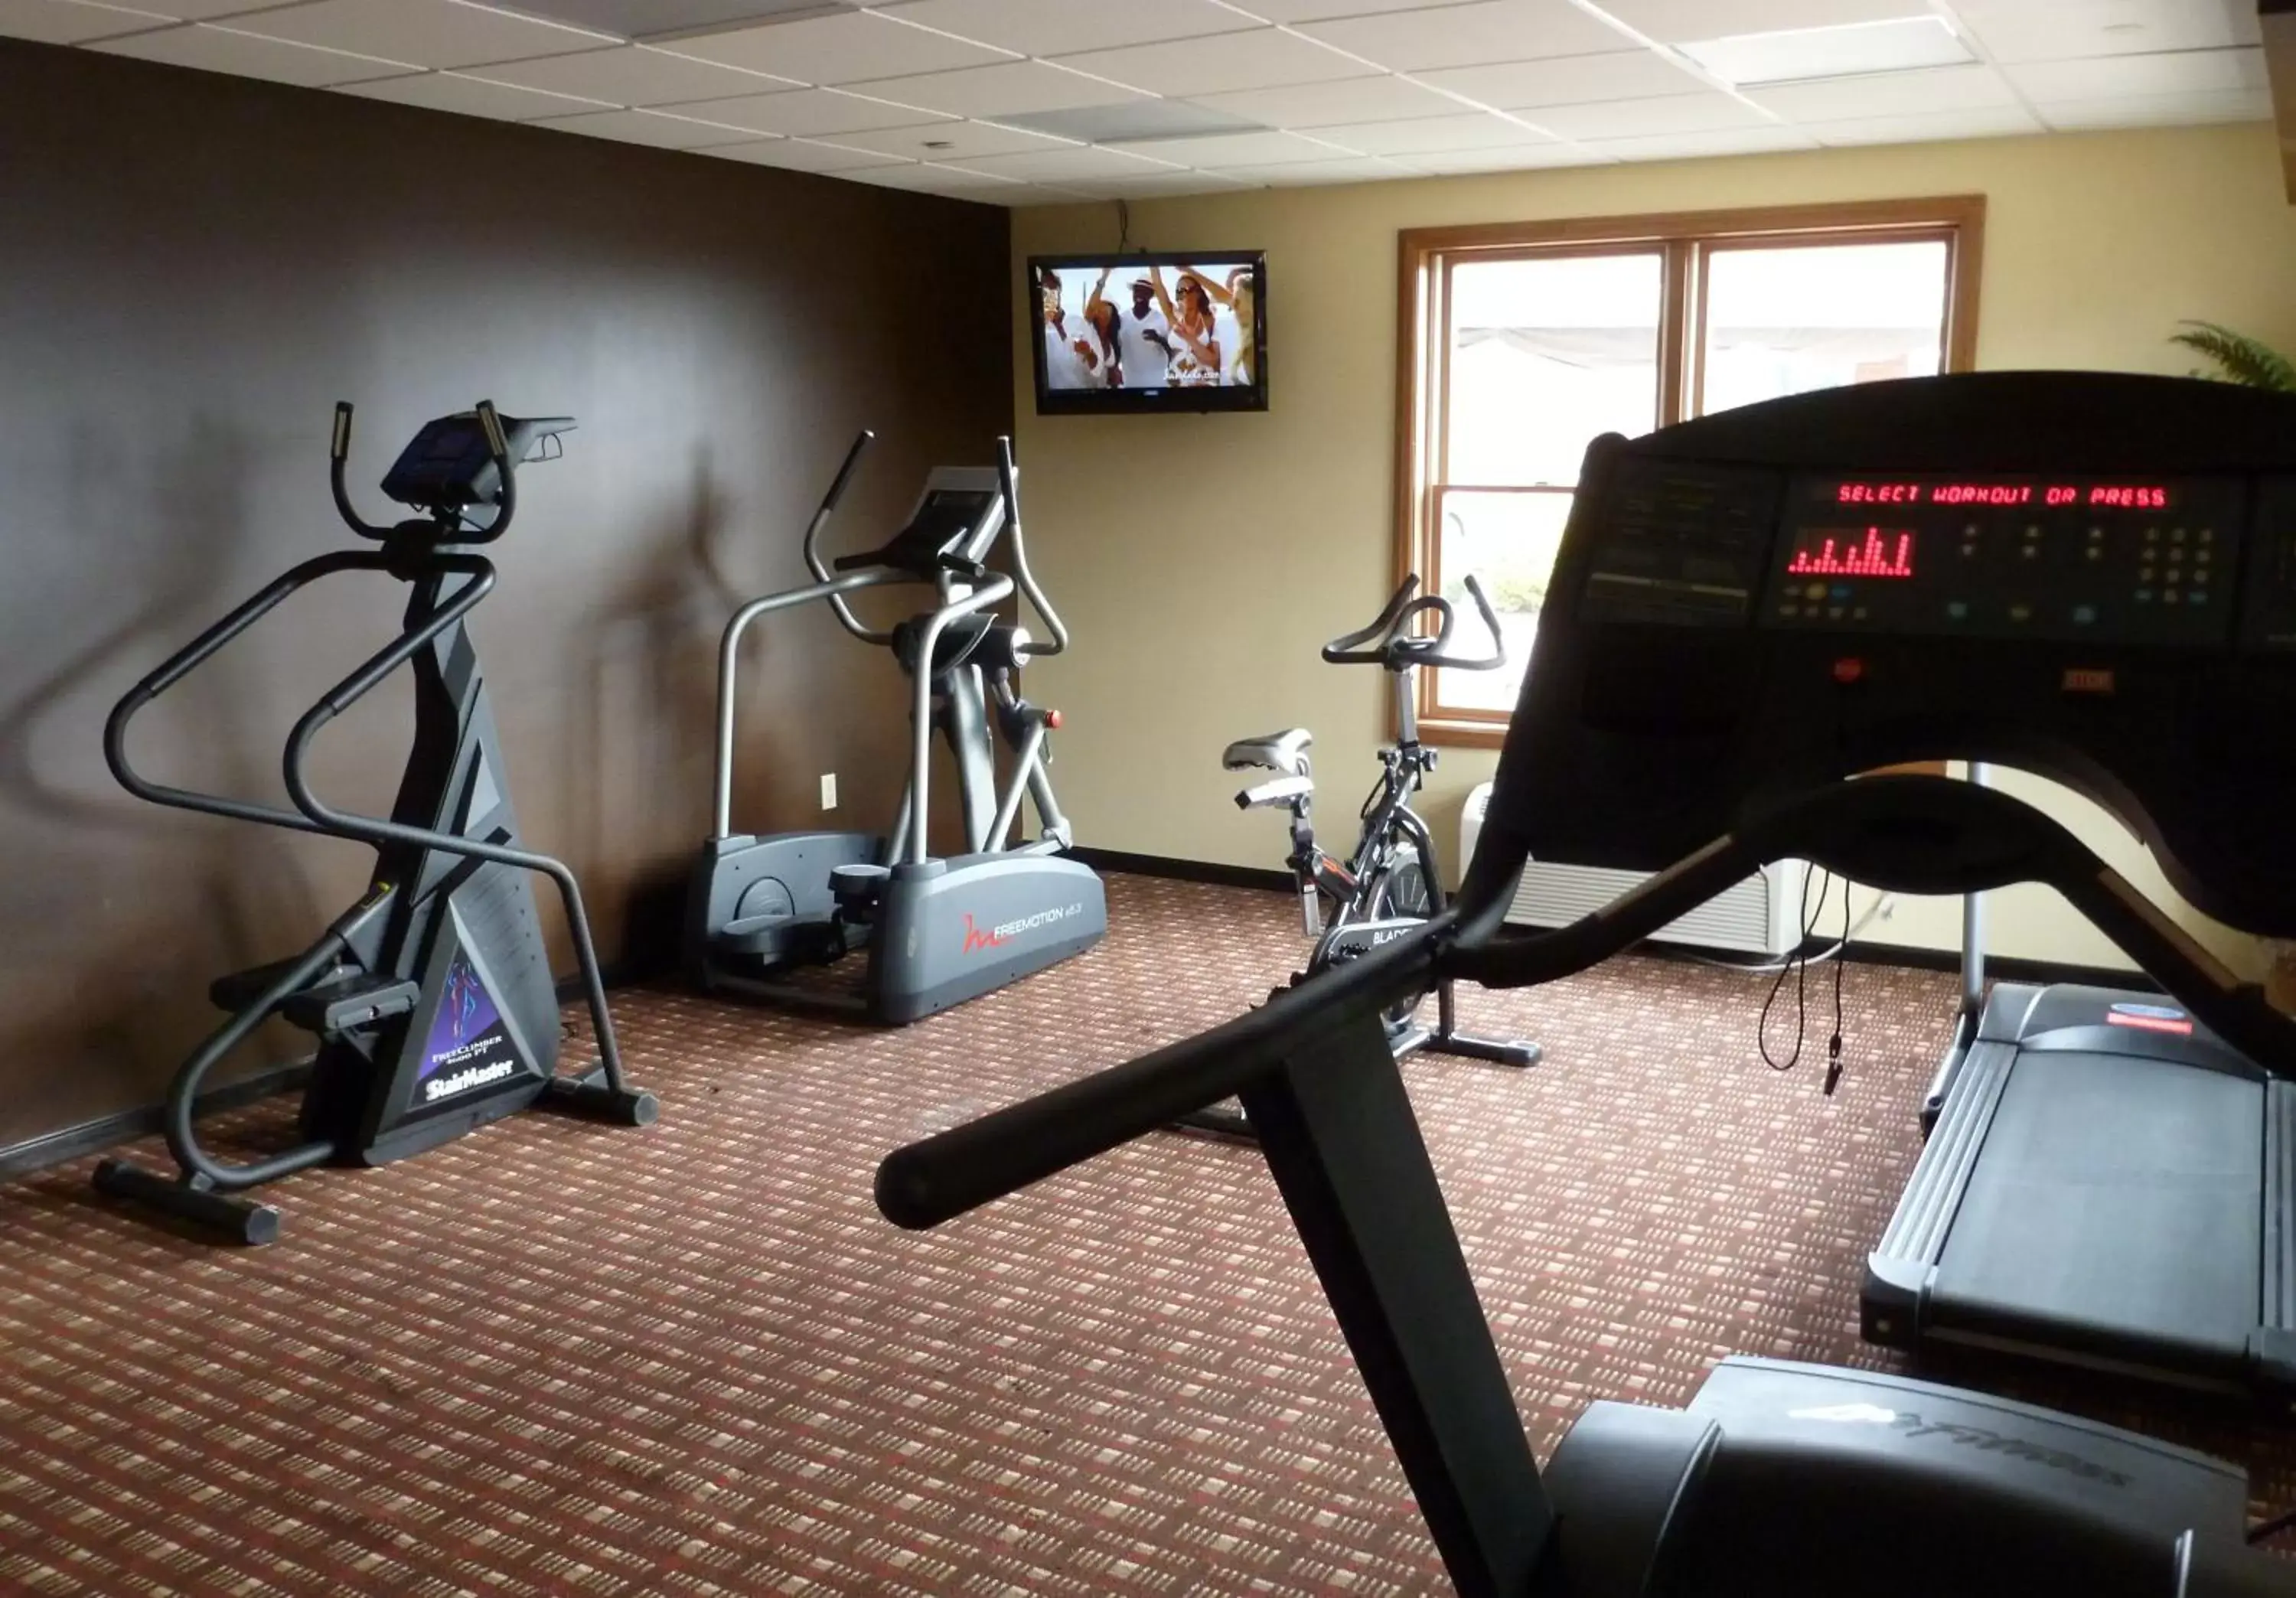 Fitness centre/facilities, Fitness Center/Facilities in Inn at Mountainview